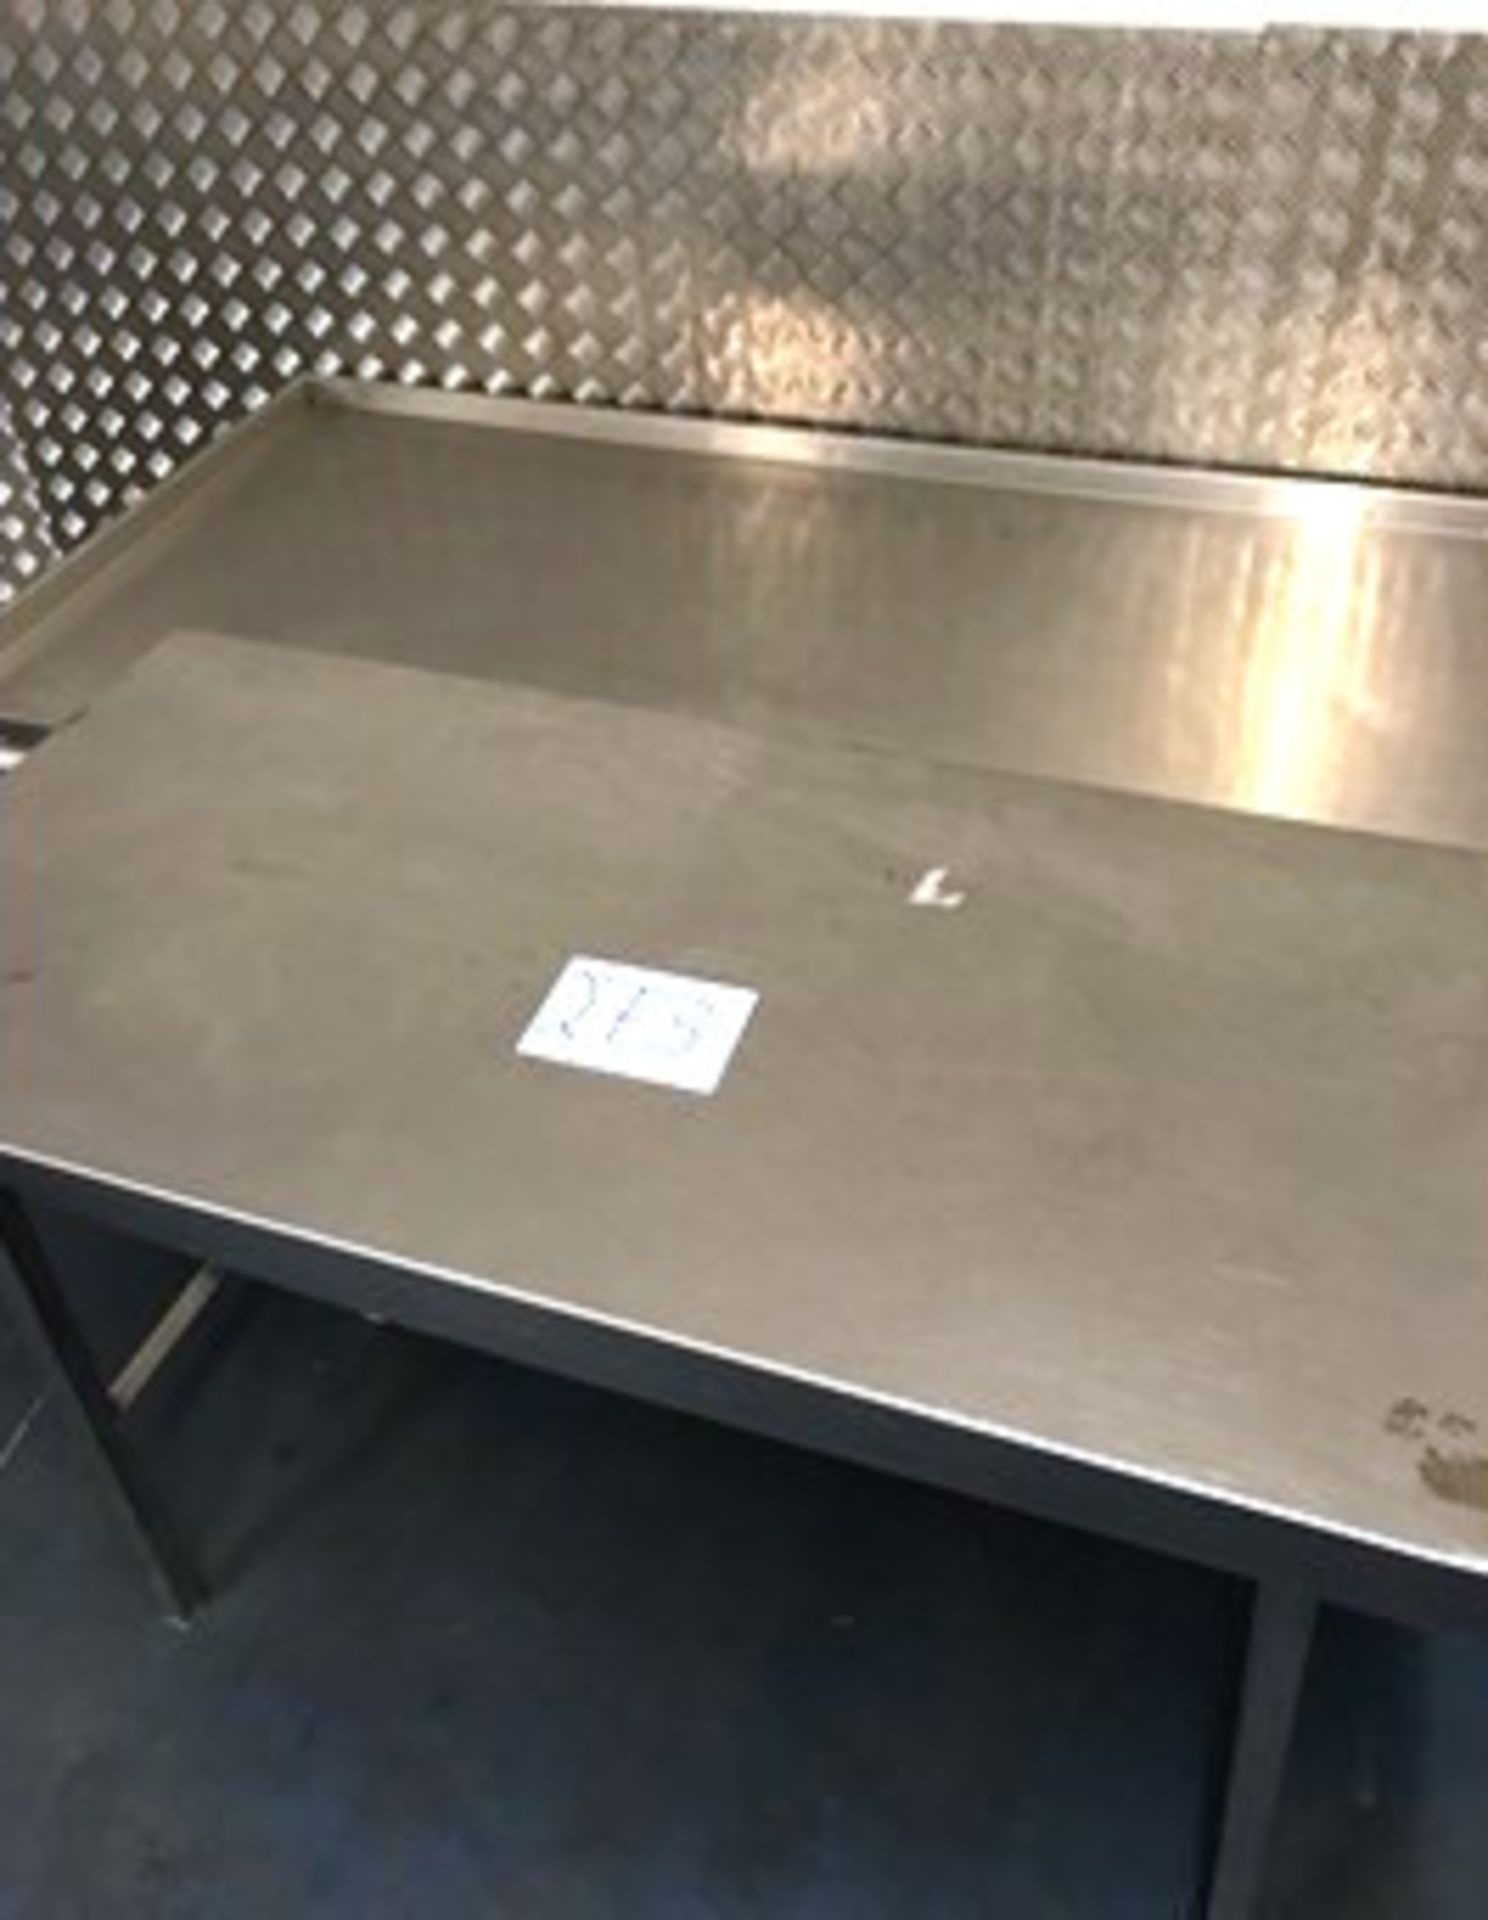 2 x S/s Tables: 1 x 1200 x 600mm; 1 x 1900mm x 750mm. LO £15